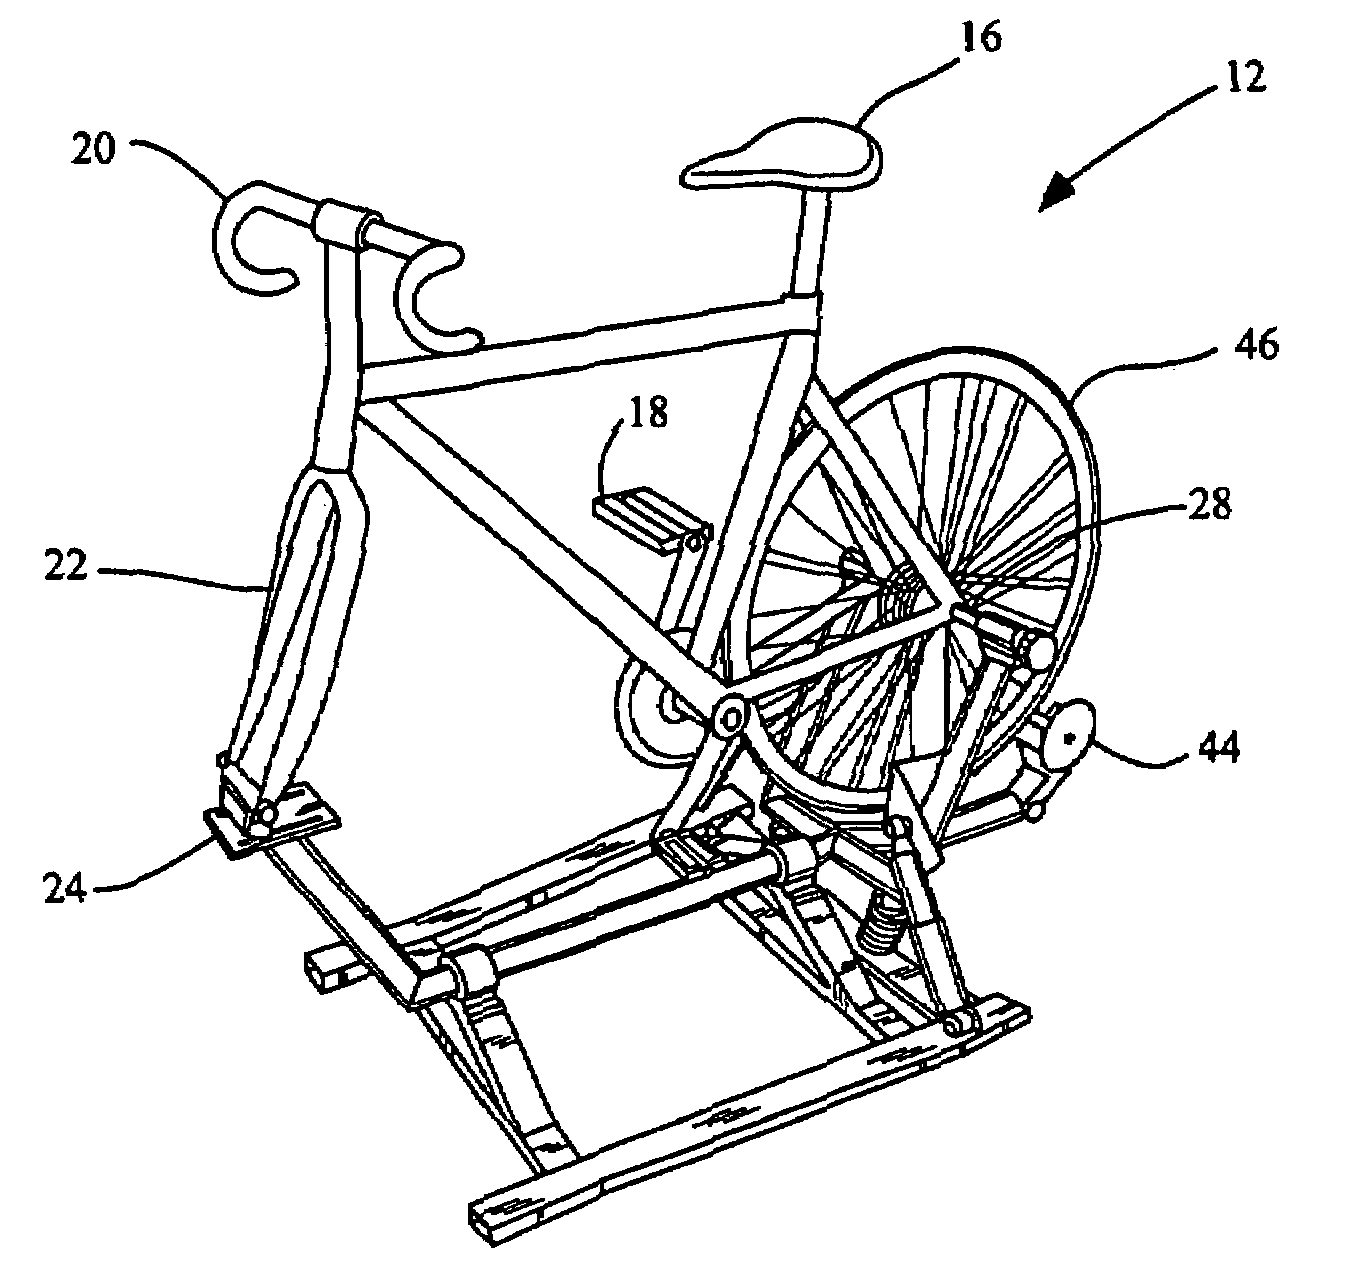 Bicycle trainer